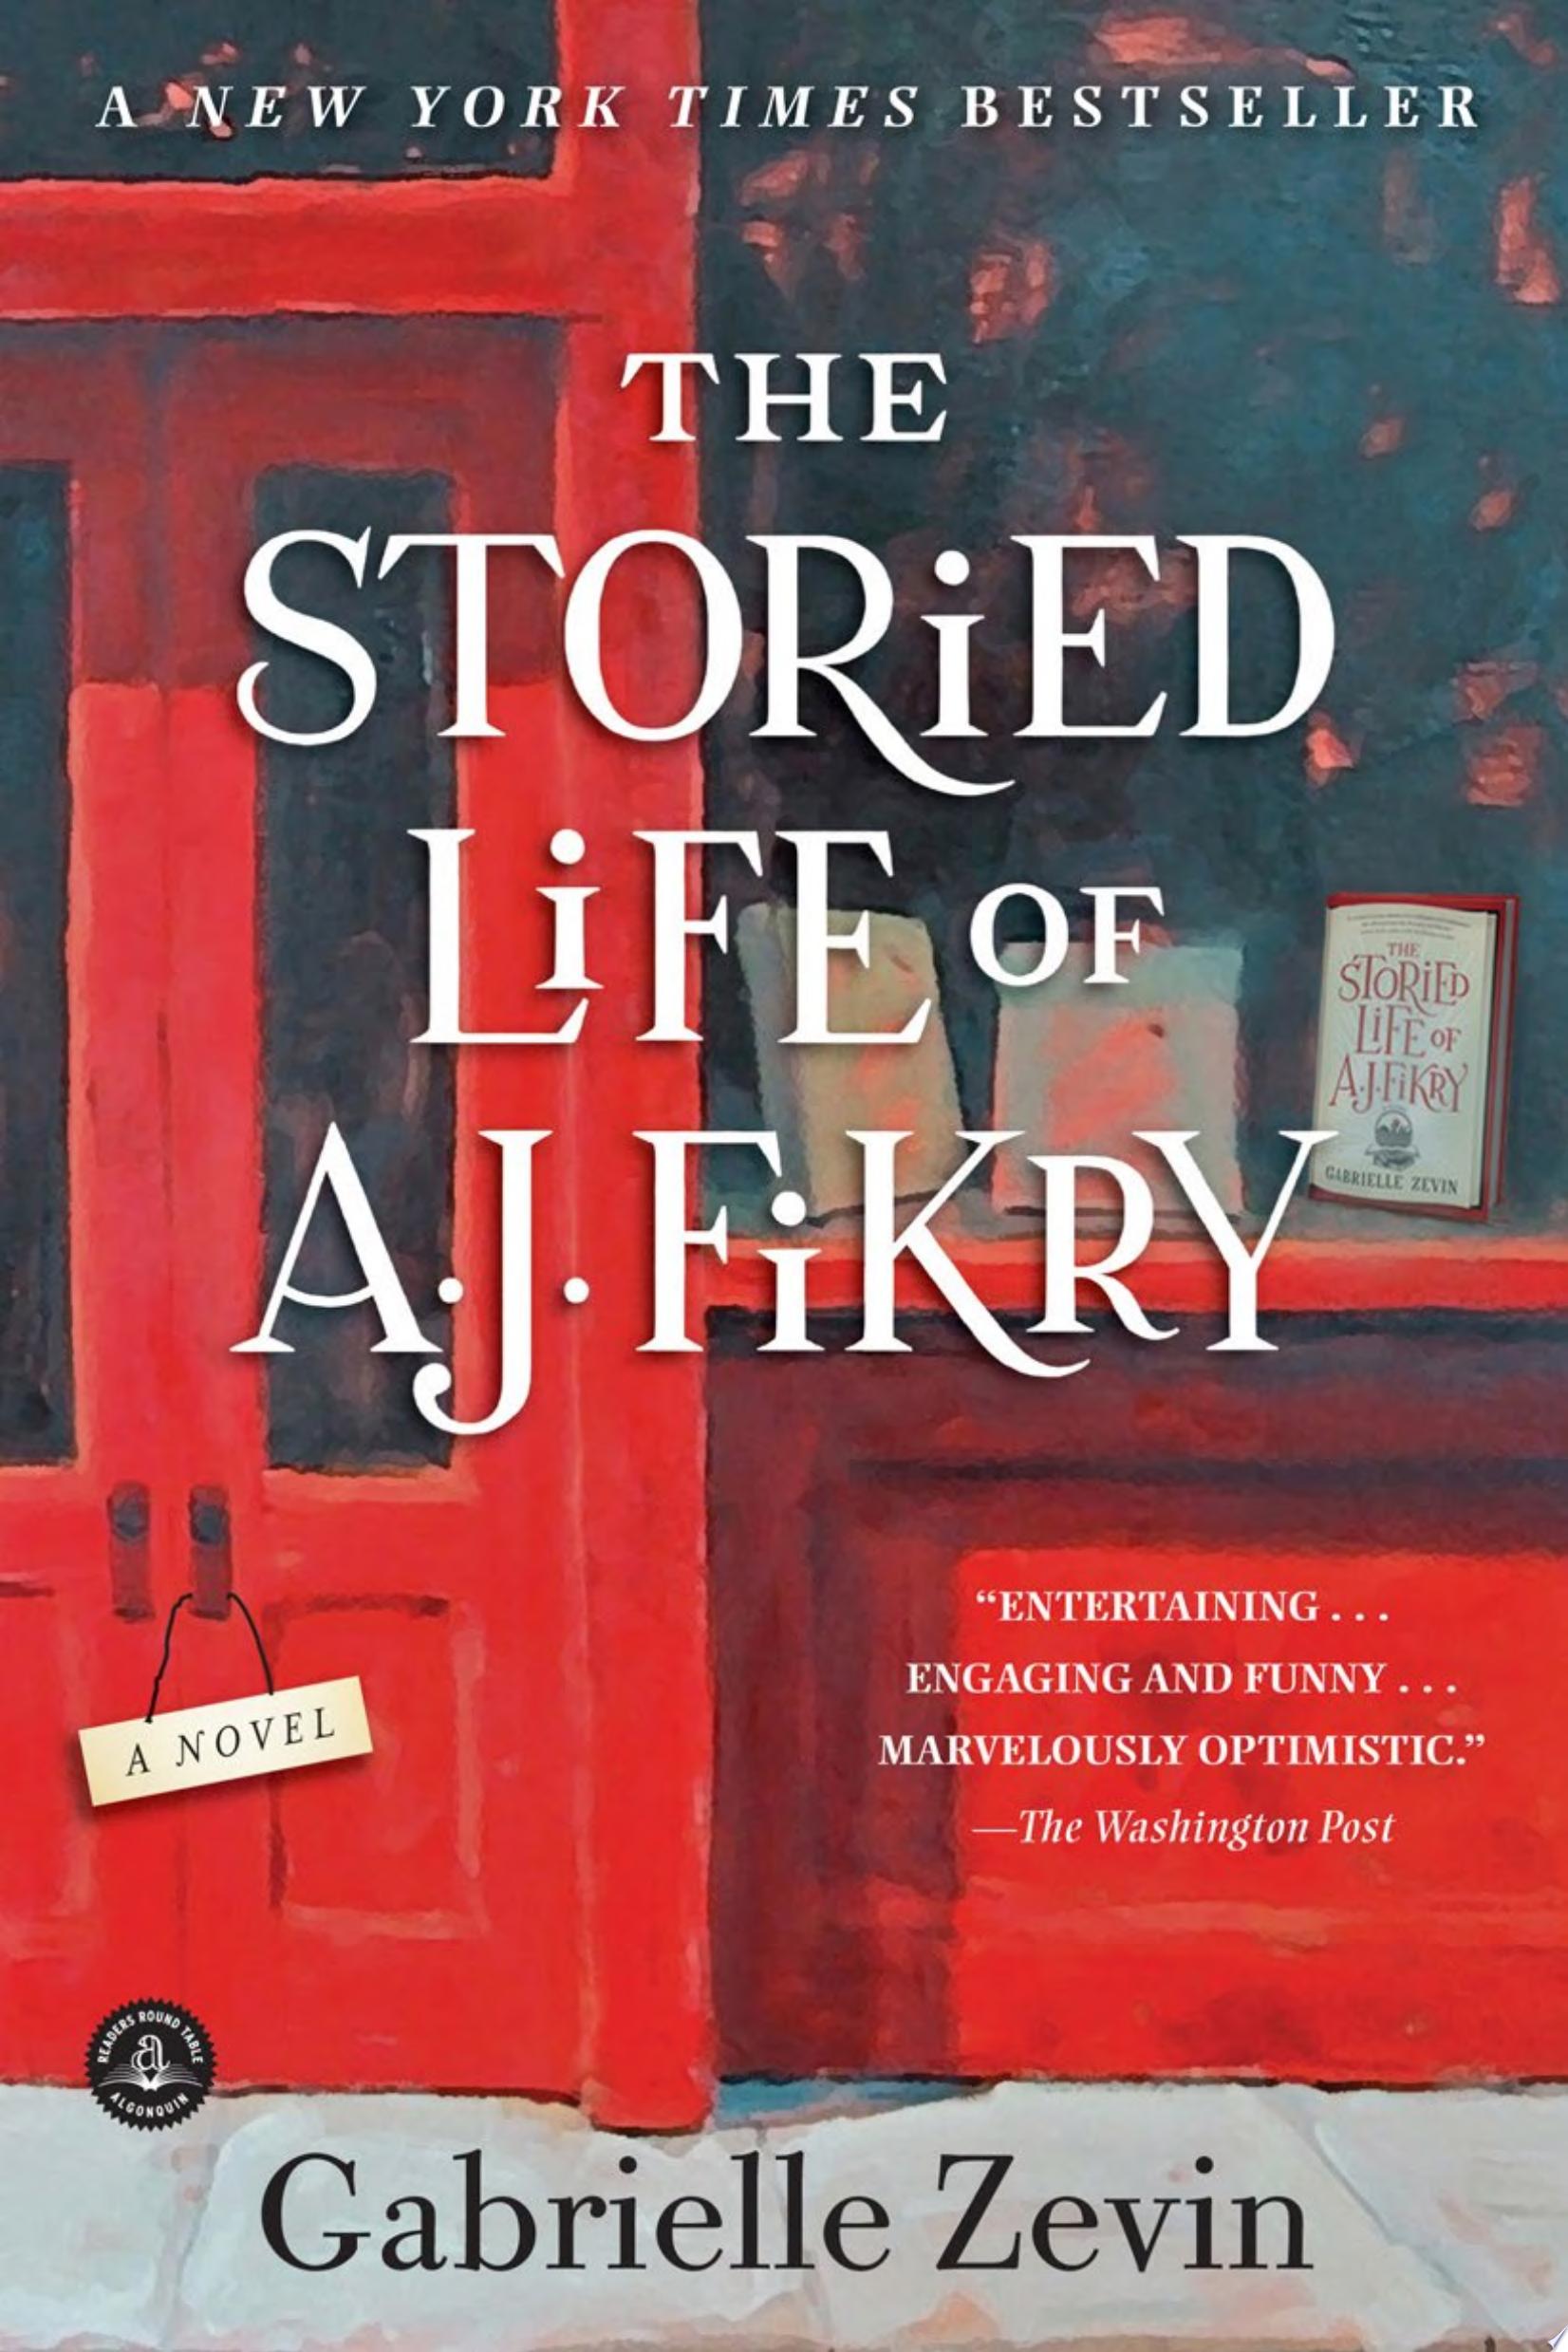 Image for "The Storied Life of A. J. Fikry"